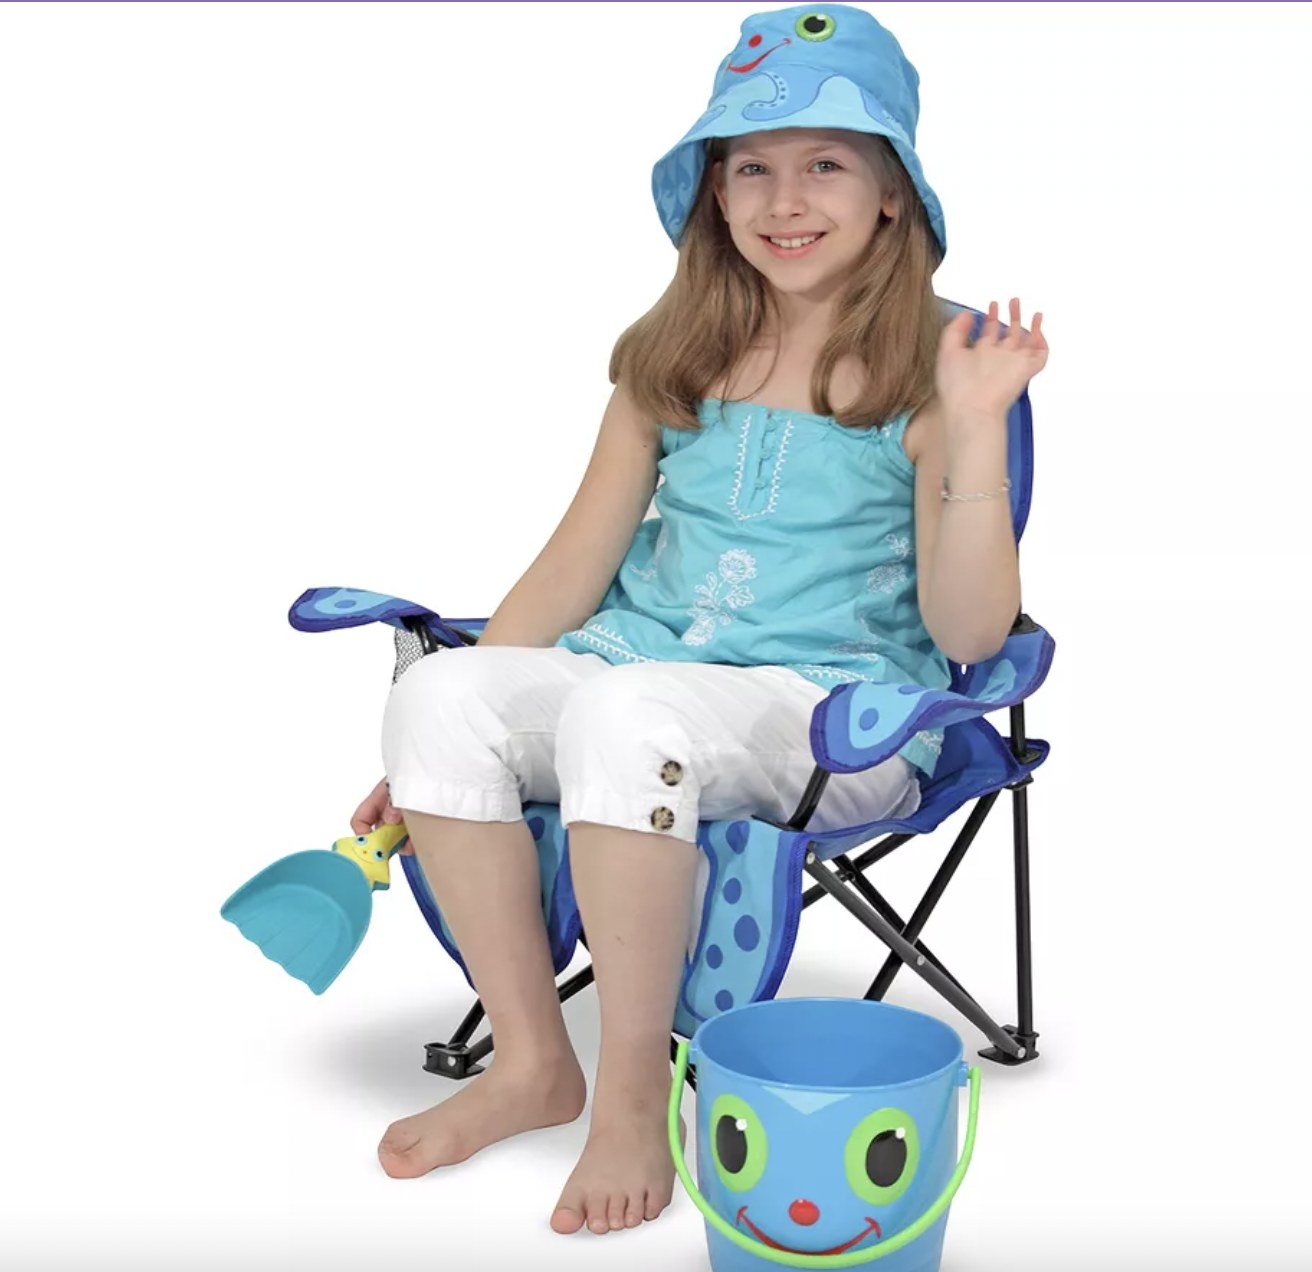 Kid sitting in camp chair